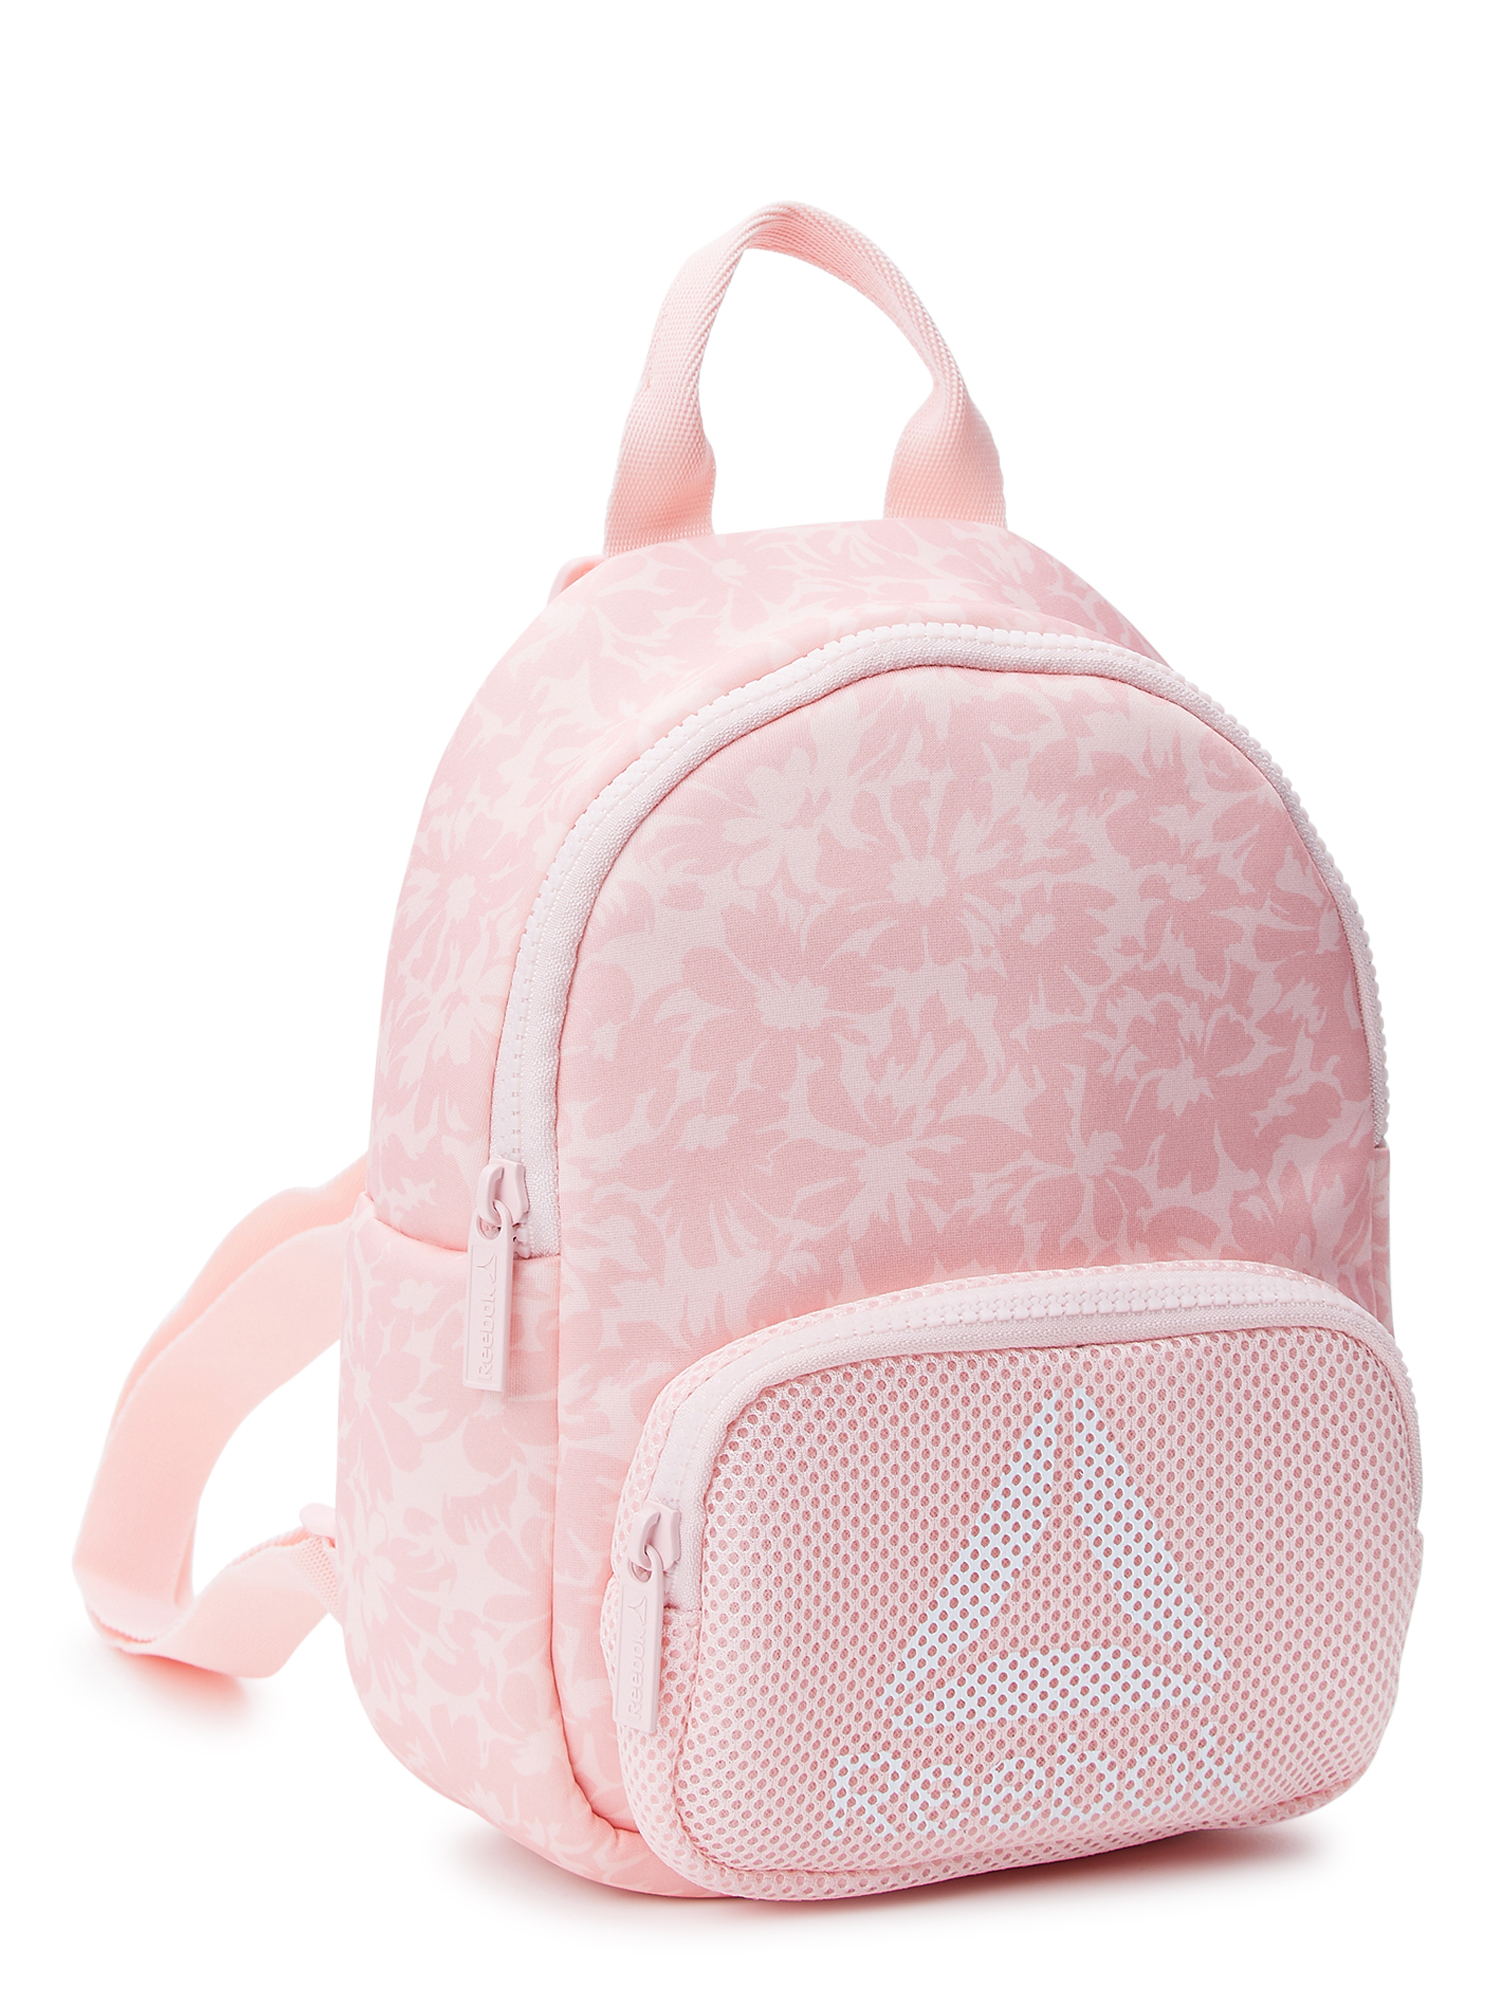 Reebok Women’s Molly Mini Backpack, Rose Daisies - image 4 of 5